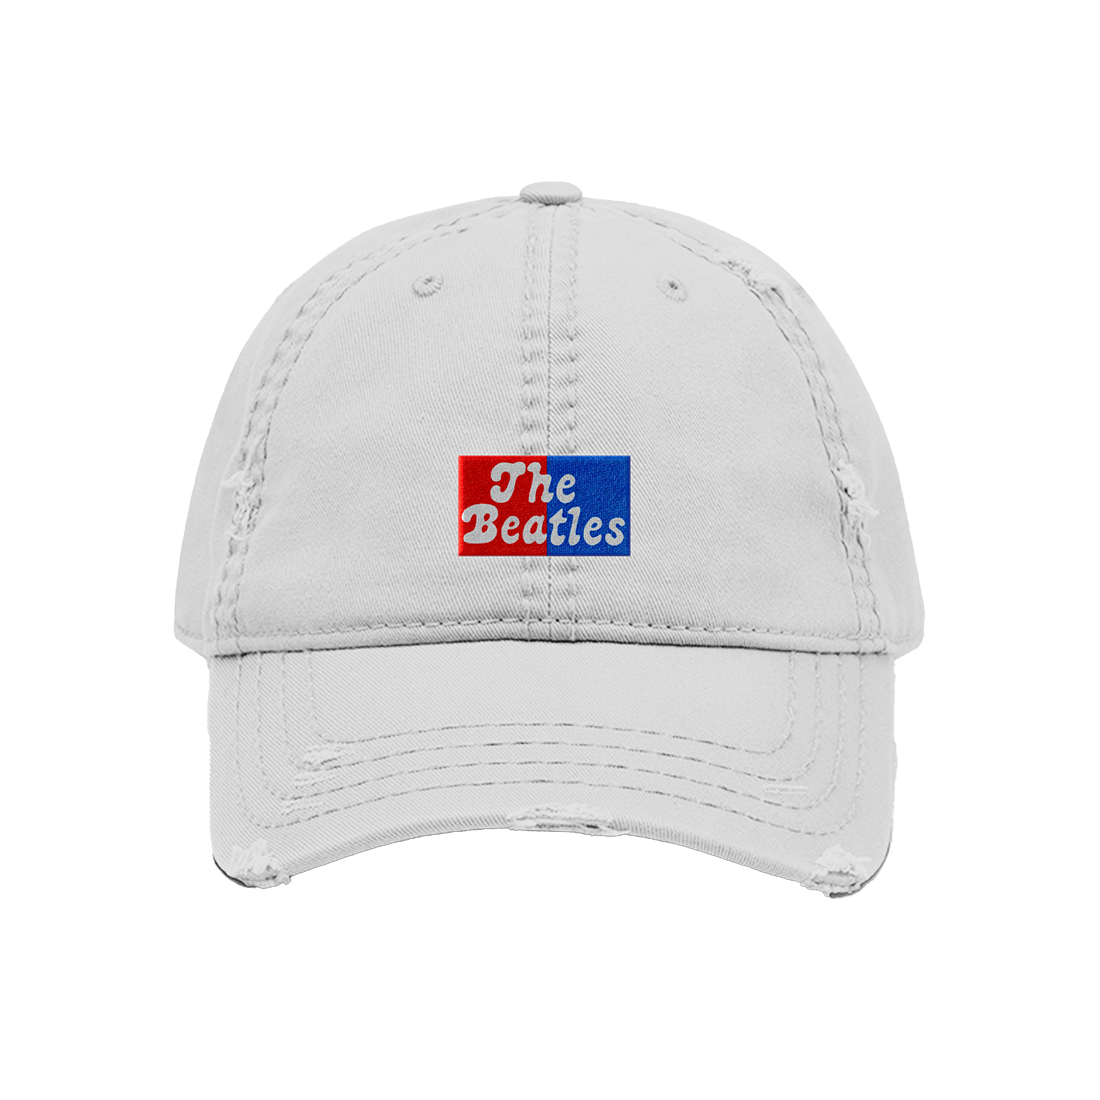 The Beatles - Red & Blue Embroidered Hat